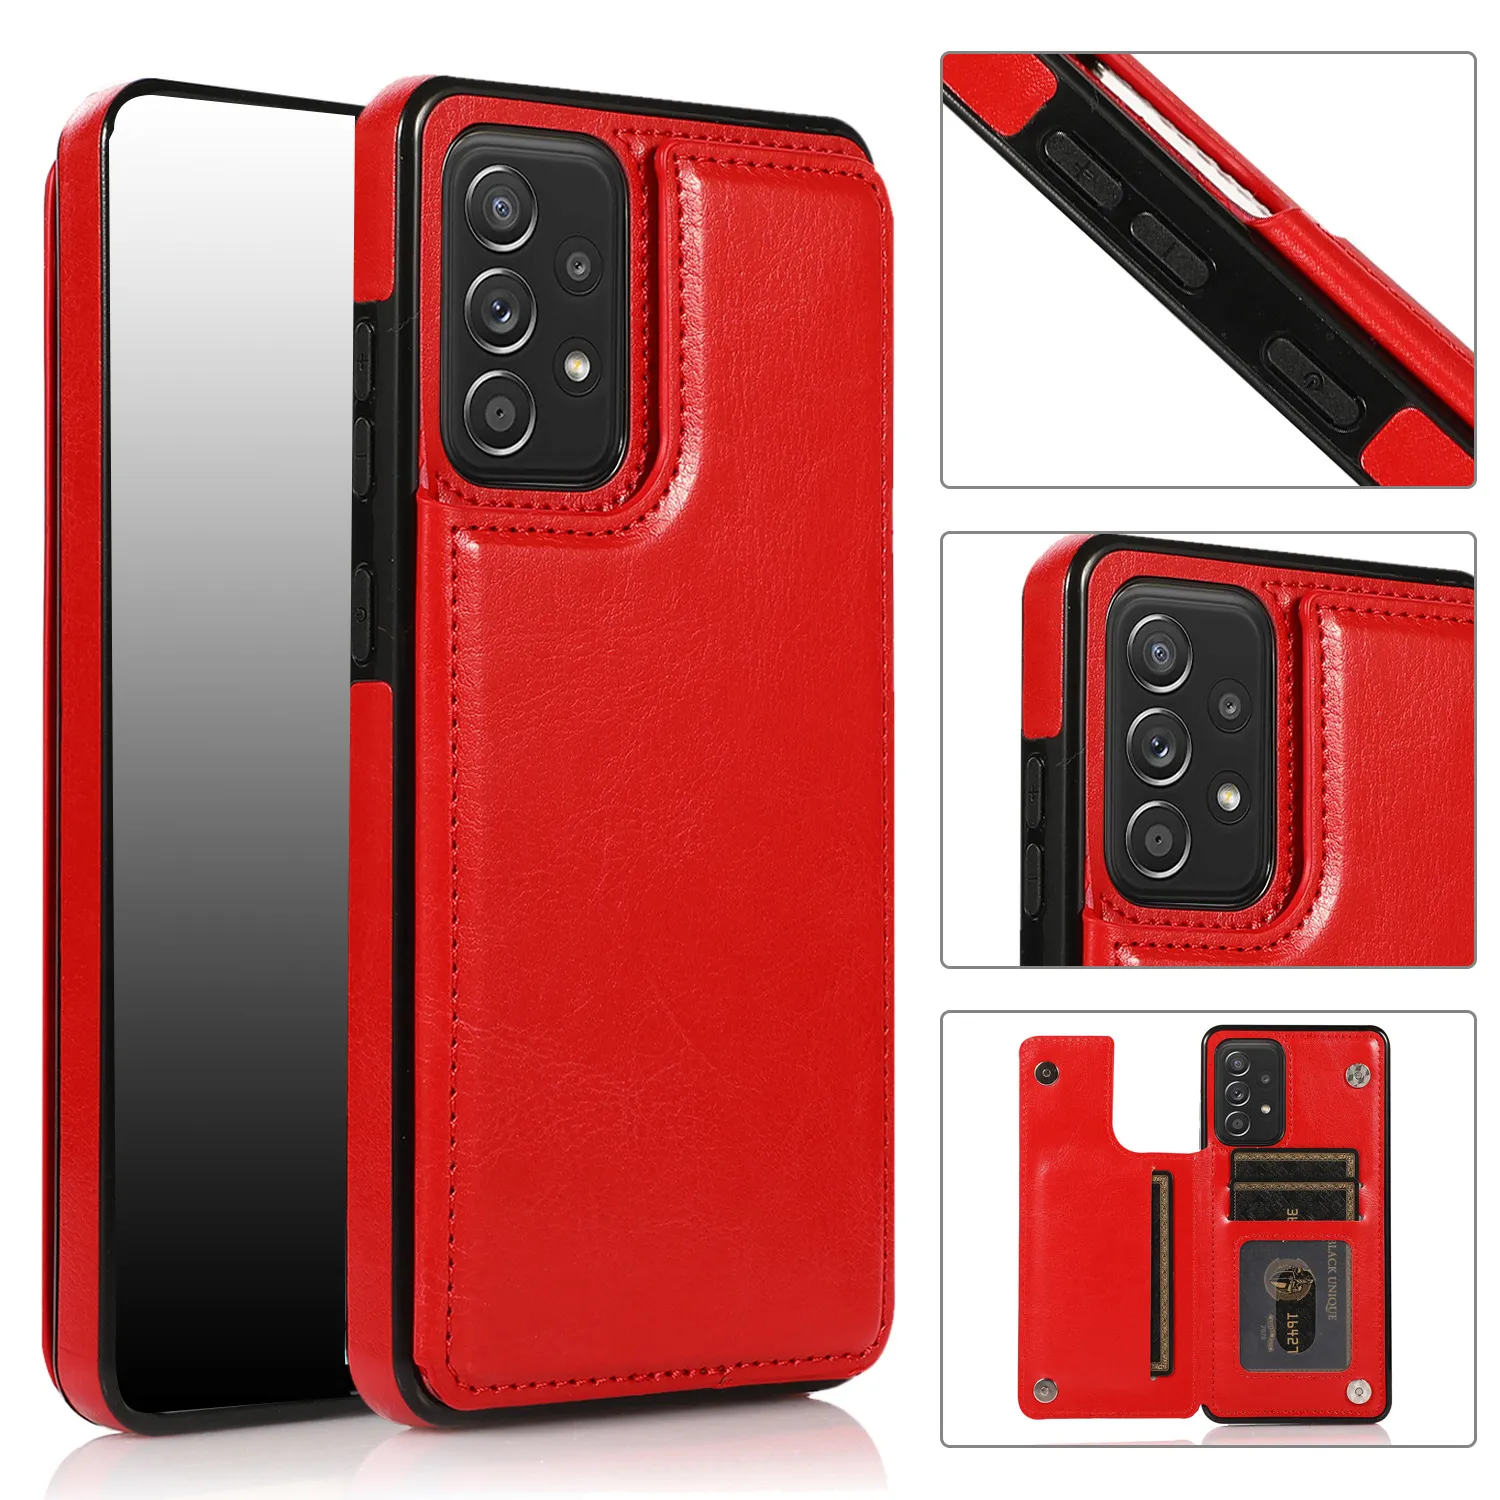 Multifunctional Leather Wallet Flip Phone Case Card Holder With Card Slot Phone Cover For Iphone 11 Phone Case